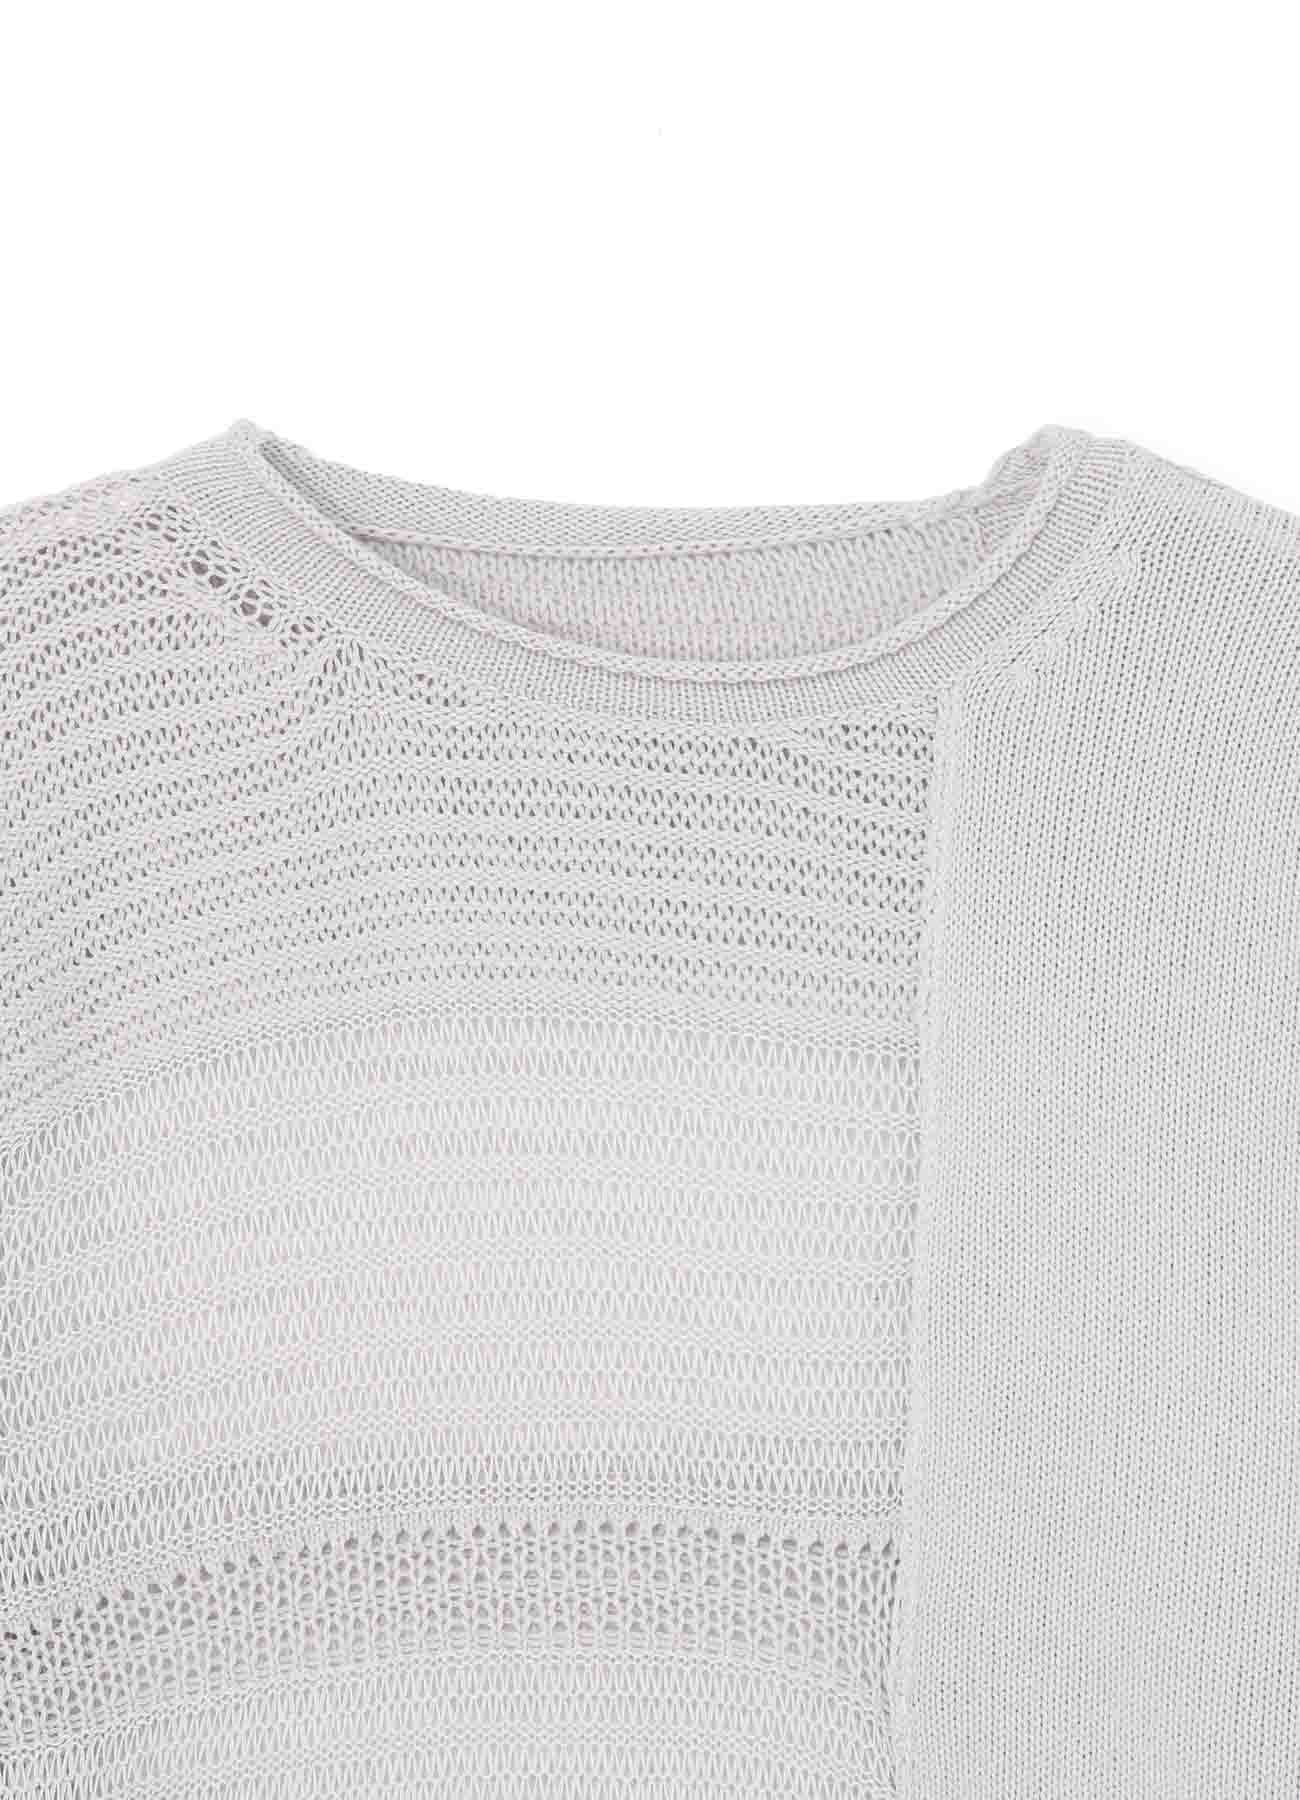 PLAIN STITCH X LACE OPEKNIT PANELLED SHORT PULLOVER